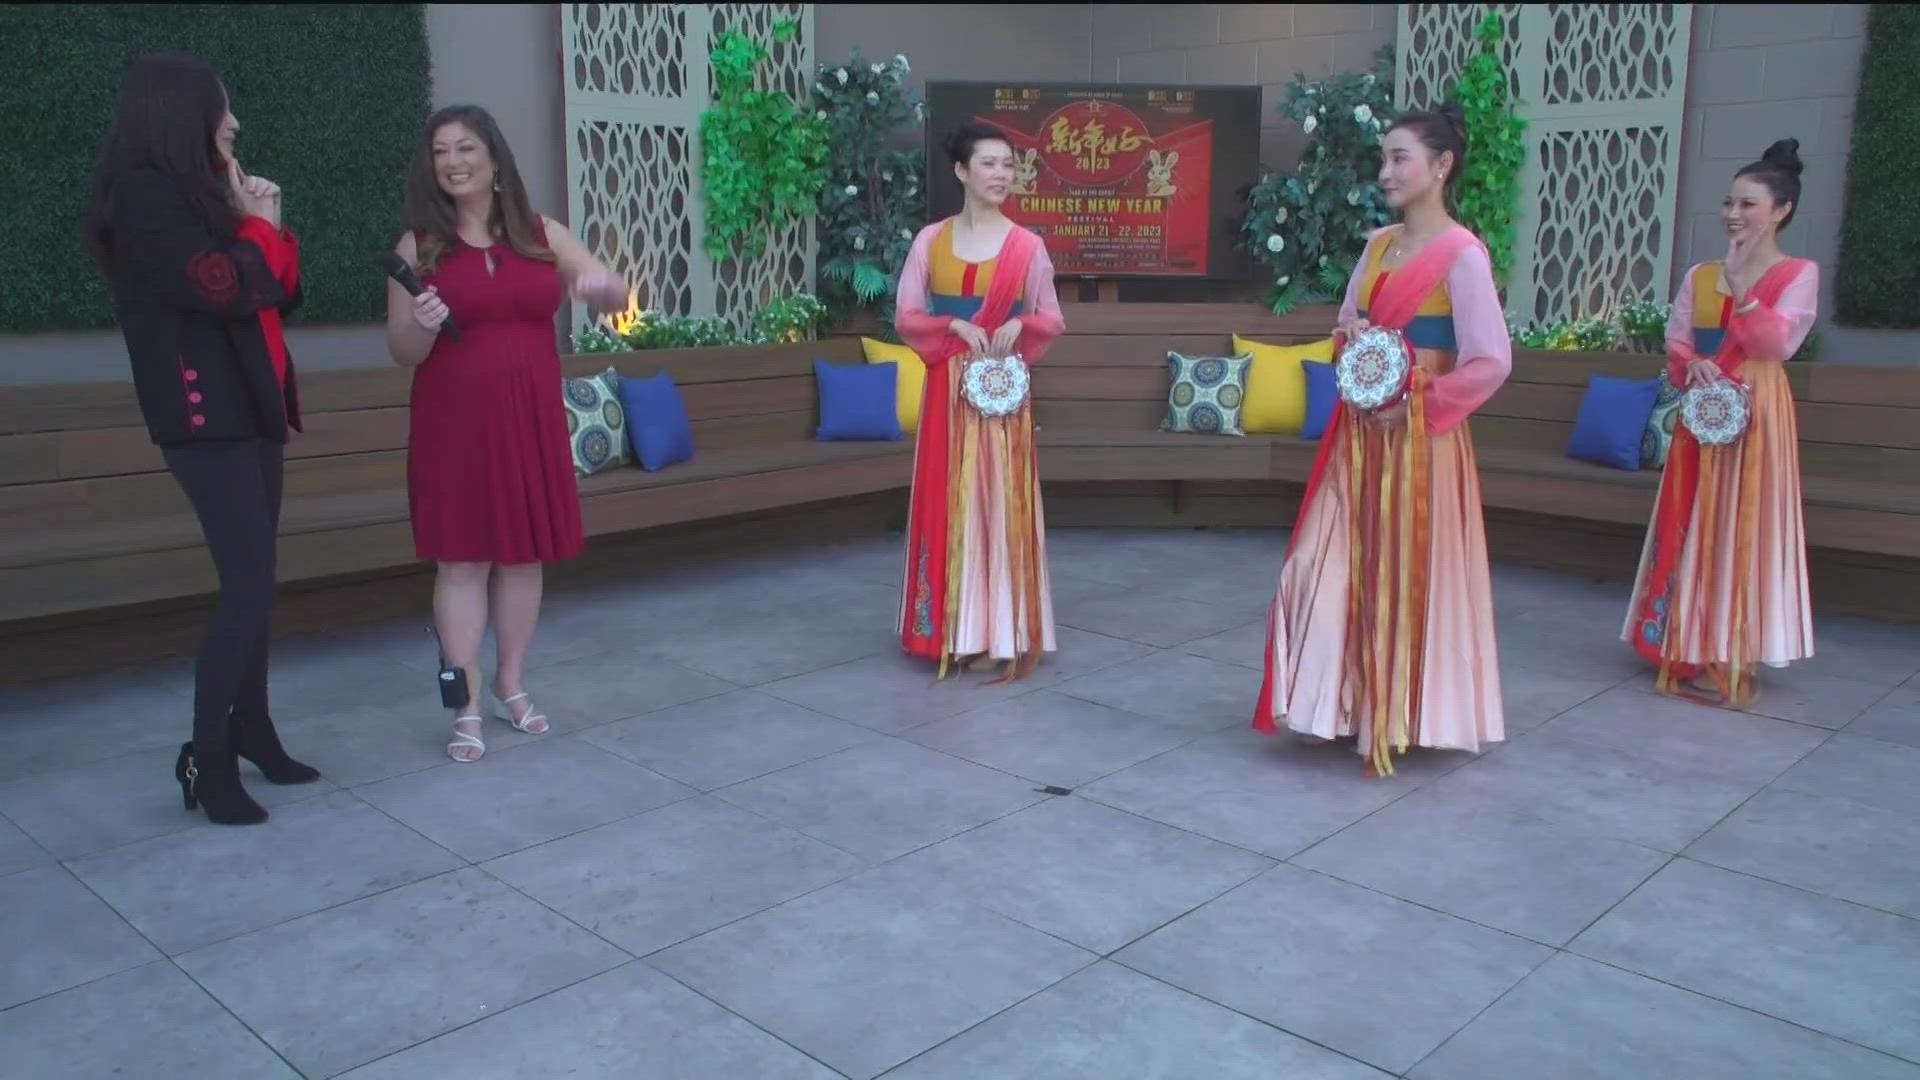 Lily Zhou and the Fan Dance Academy talked about the Lunar New Year and what visitors can expect at the festival.